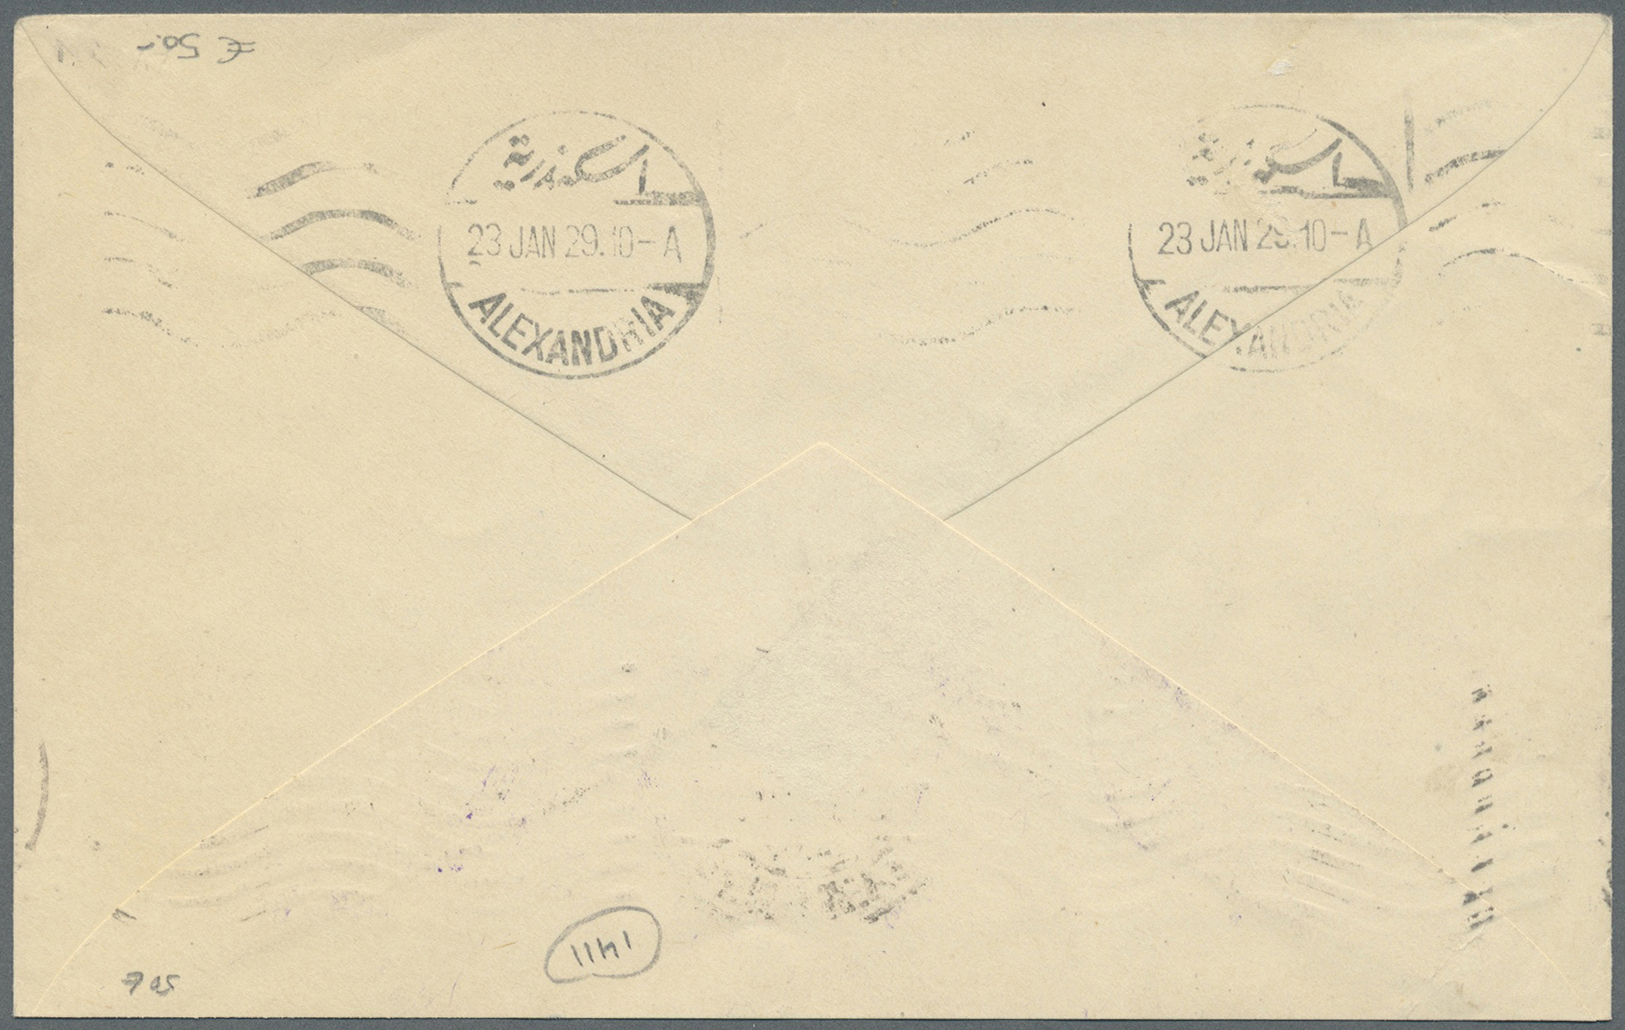 Br Ägypten: 1929 SHIP MAIL By S/S "RODA": Cover From Piraeus, Greece To Alexandria Bearing Five King Fouad Definitives ( - 1915-1921 British Protectorate